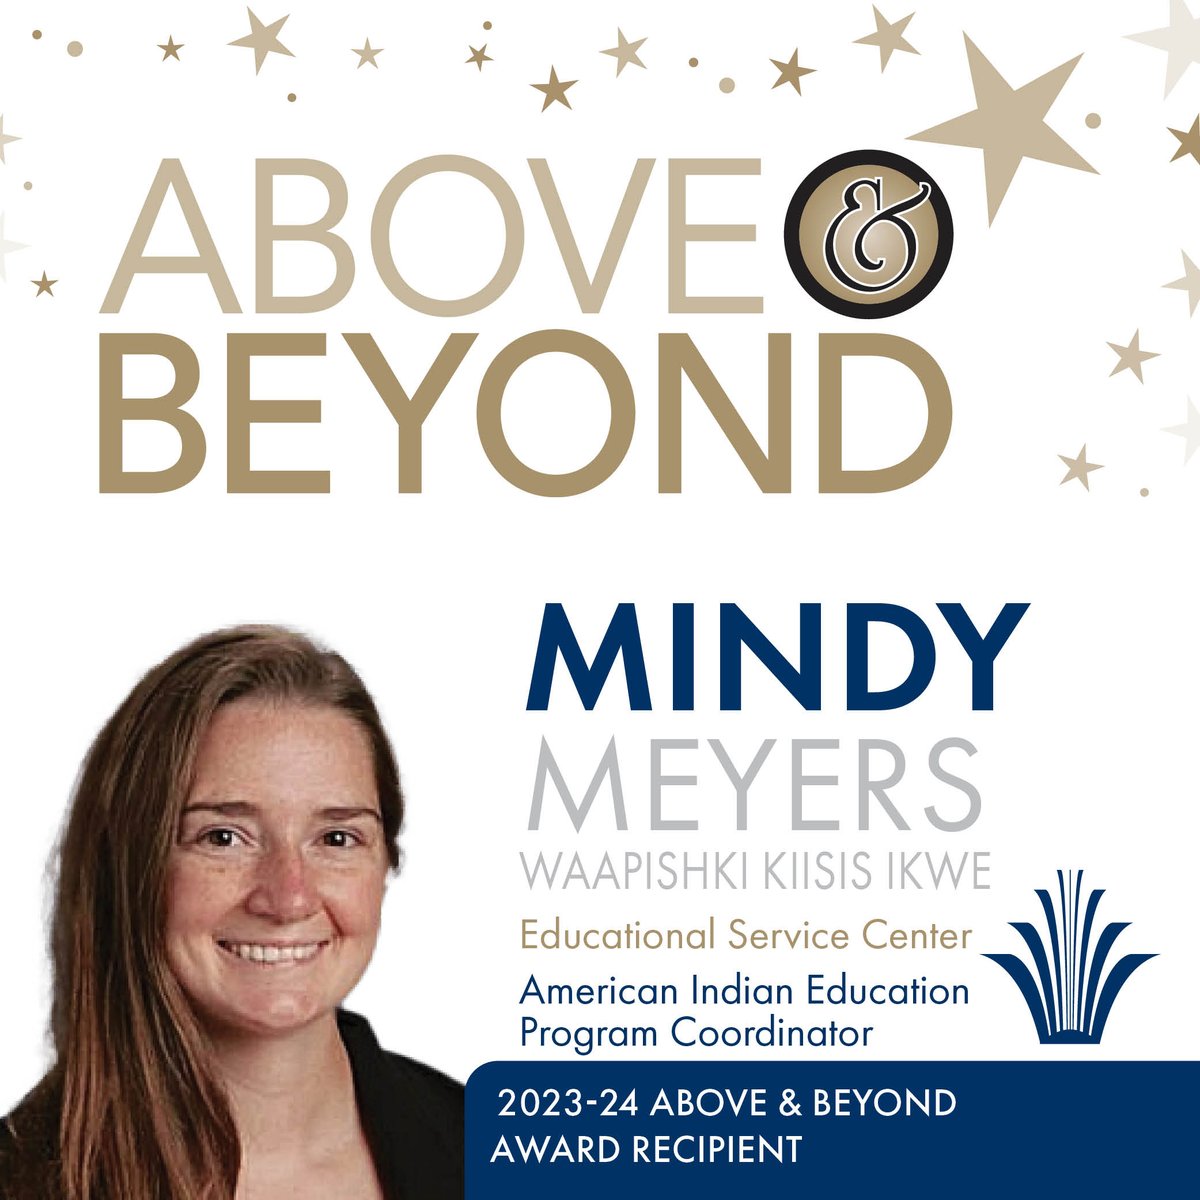 Congratulations to 2023-24 Above & Beyond Awards recipient: Mindy Meyers! Over the last 11 years, Mindy has used her value in service to the community as a tool to help grow & support students in the #AHSchools American Indian Education program. Read more: bit.ly/4aCwGHX